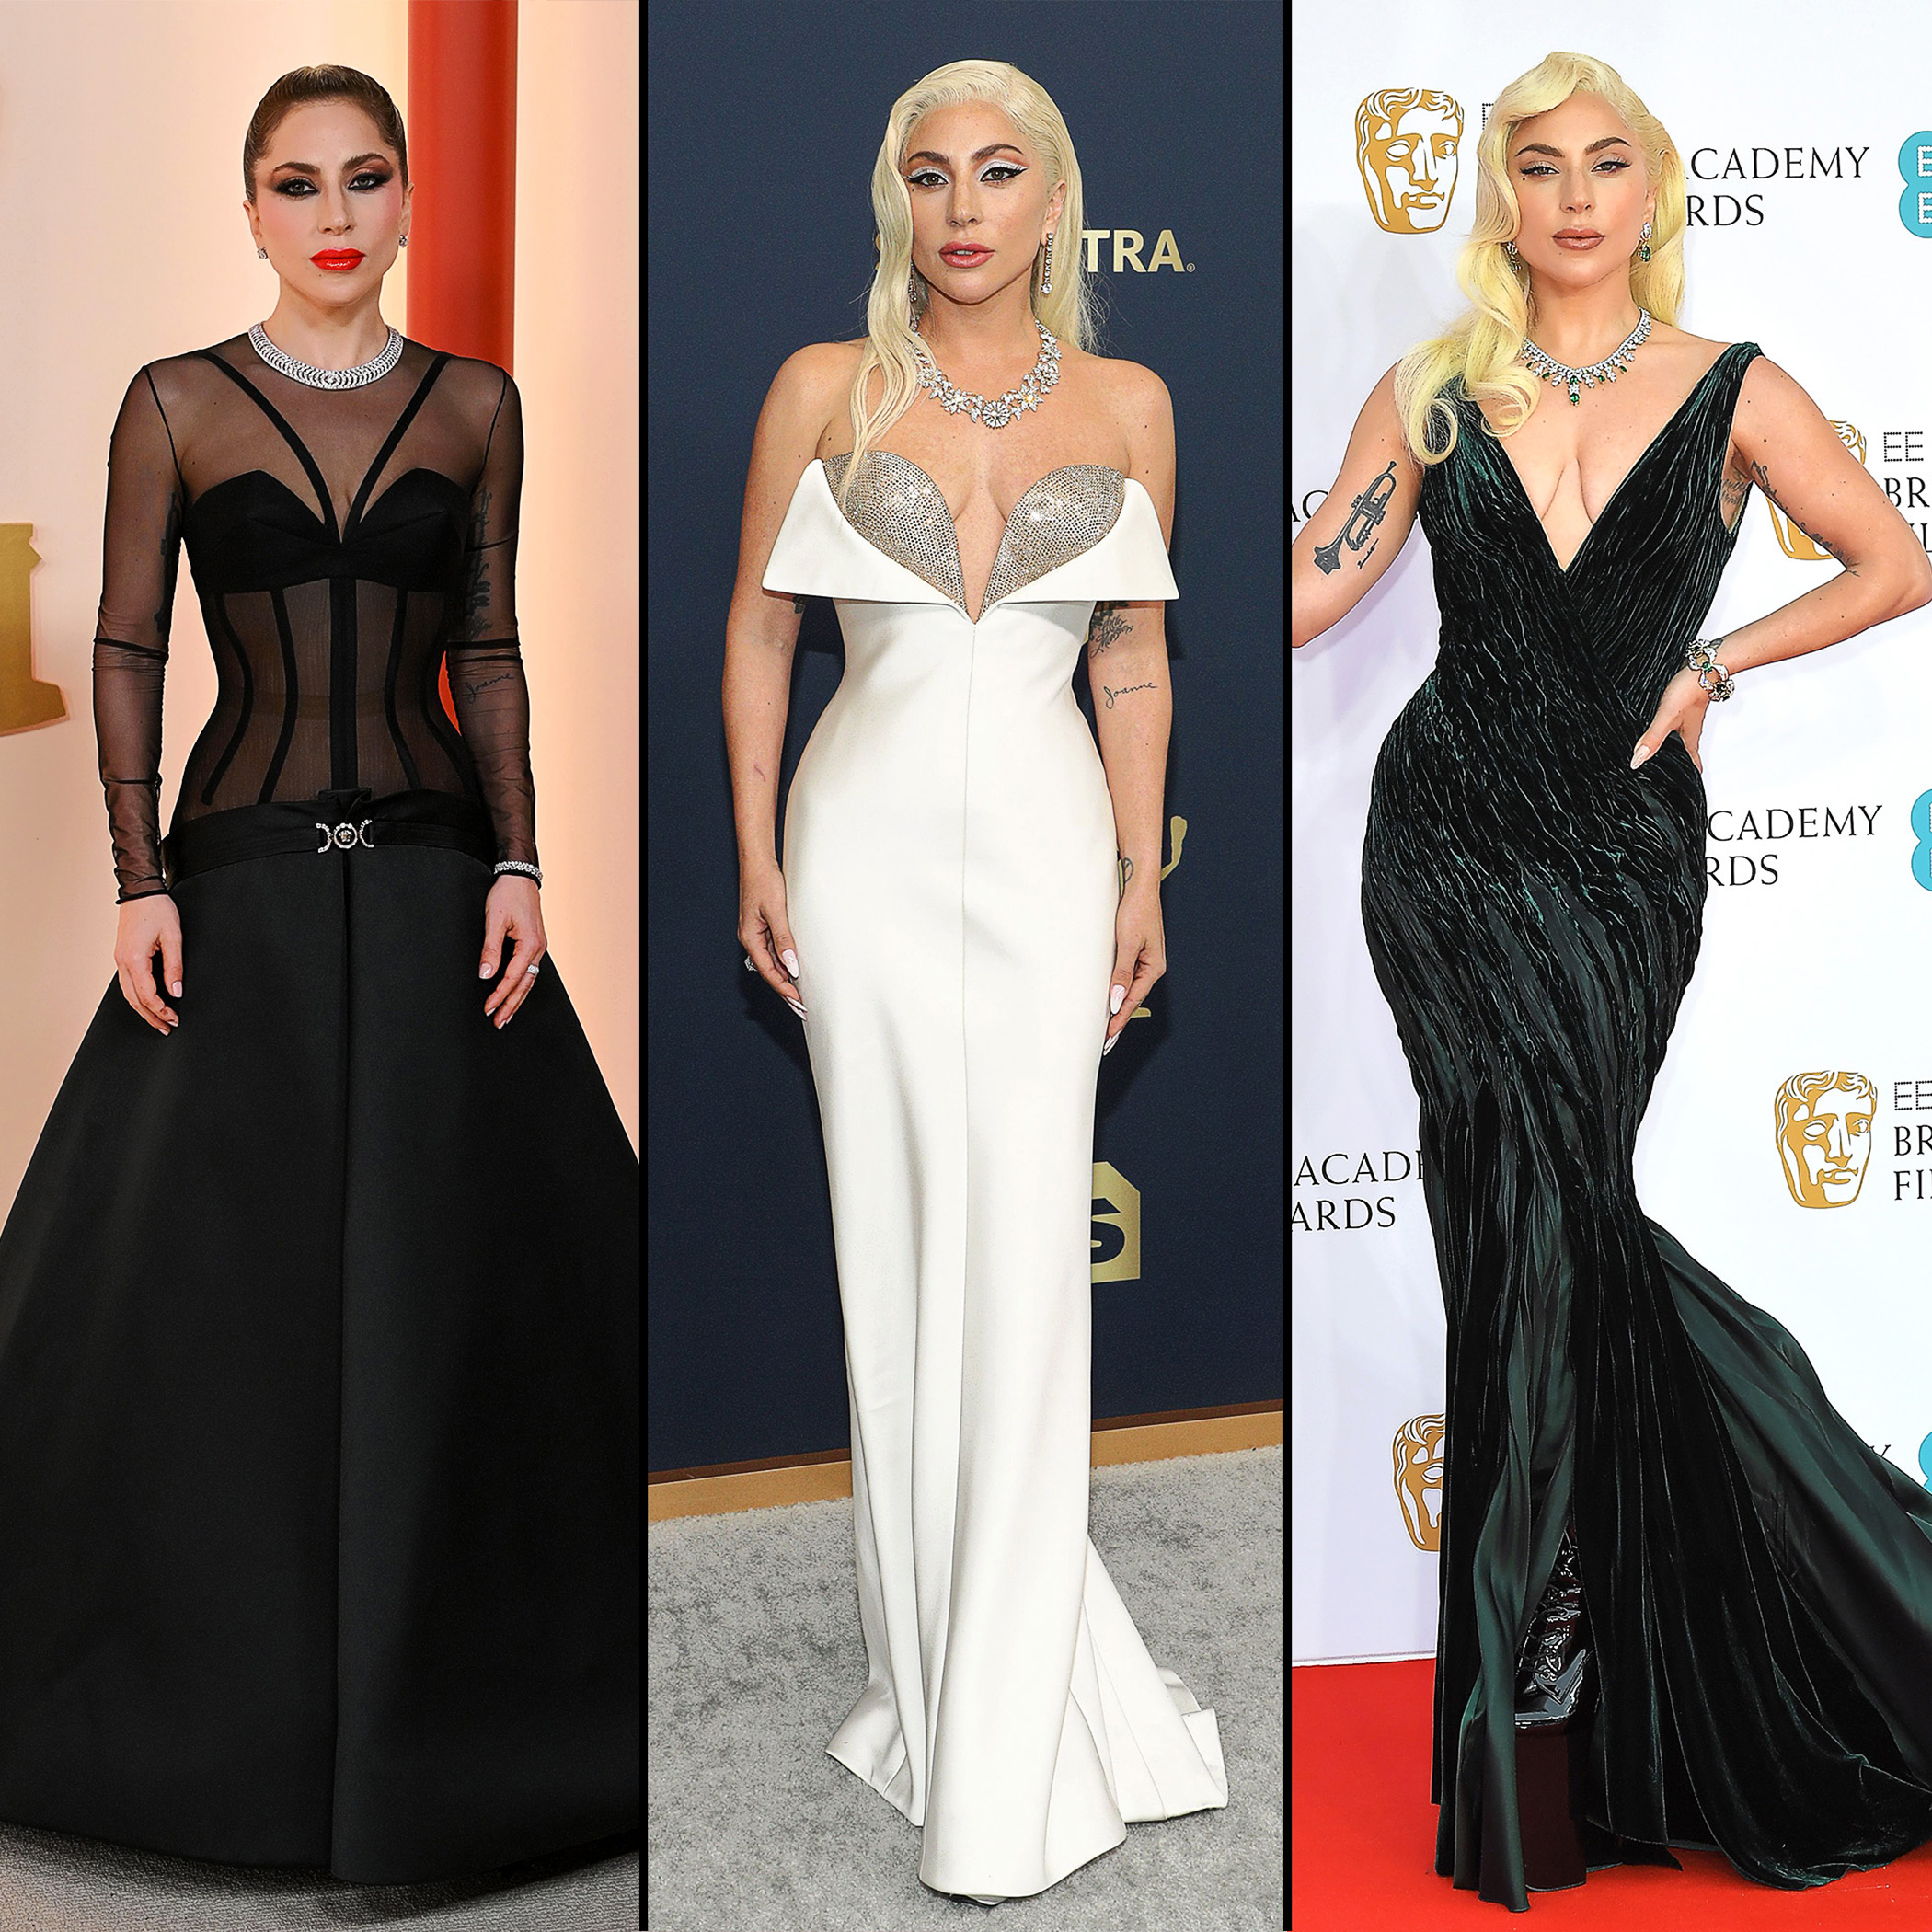 Lady Gaga's Wildest Fashion and Beauty Looks: Pics